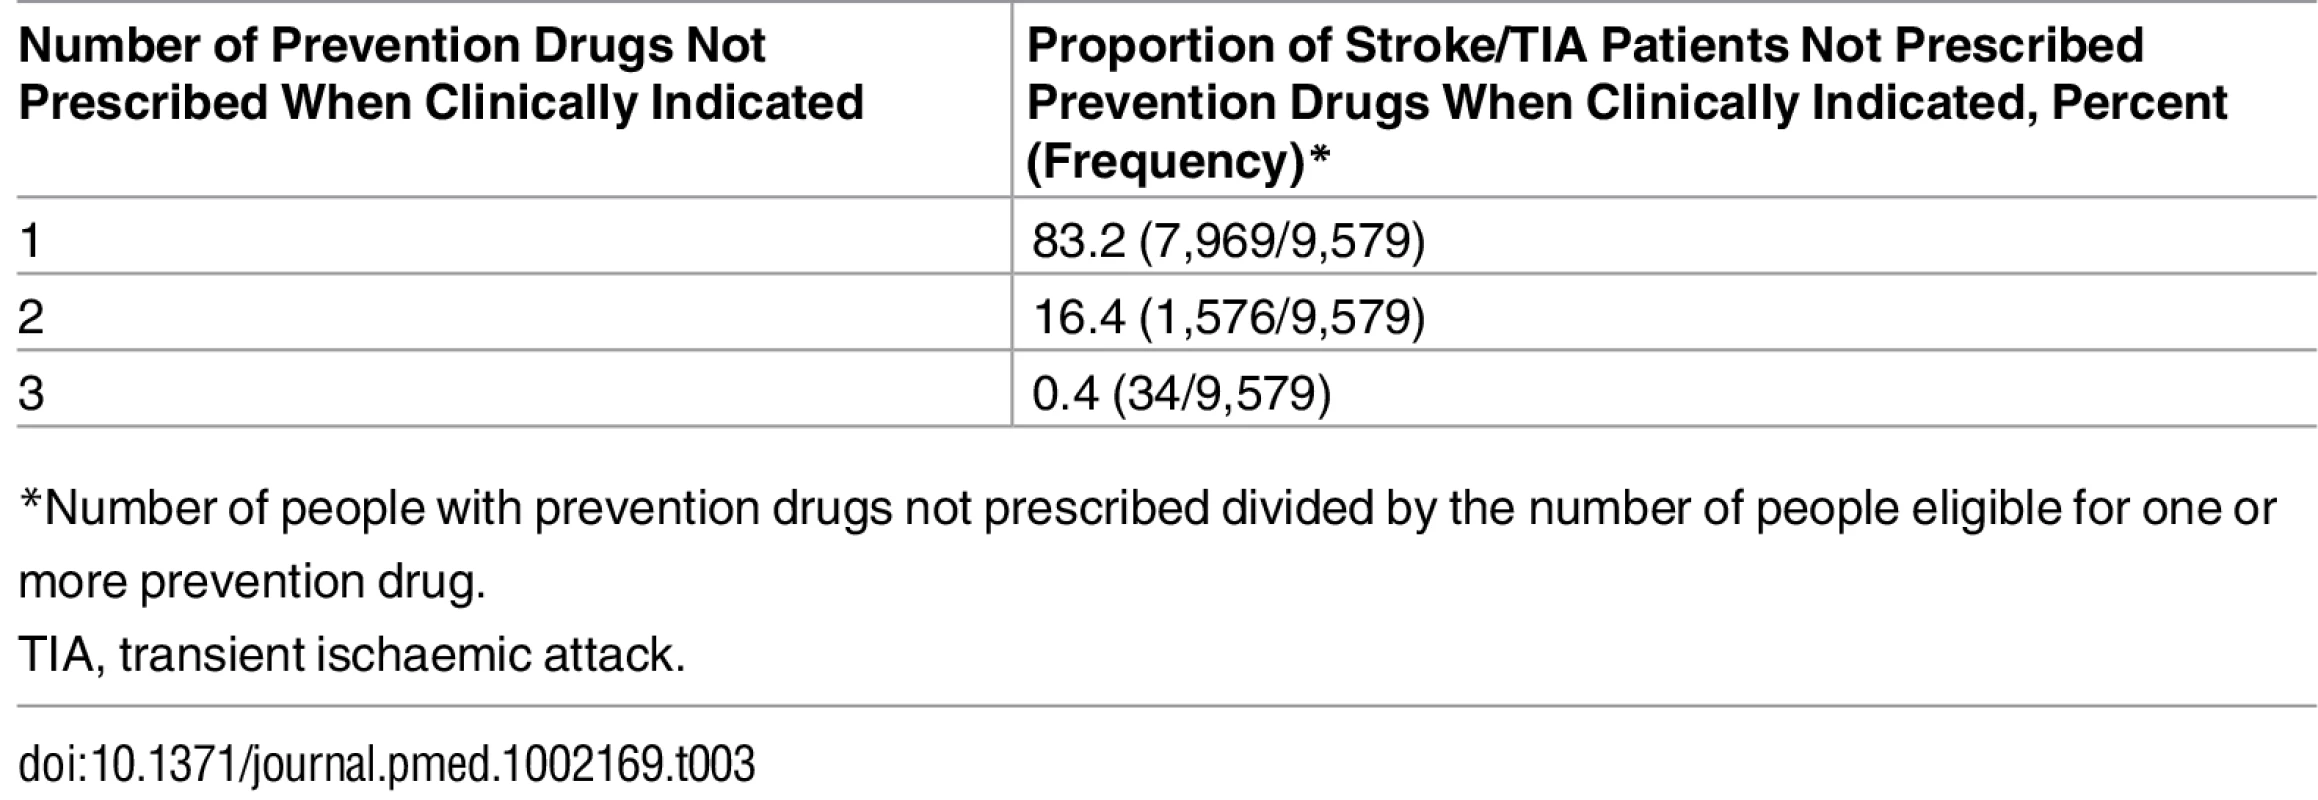 Proportion of stroke and transient ischaemic attack patients under-prescribed one, two, or three prevention drugs (lipid-lowering, anticoagulant, or antihypertensive drugs).